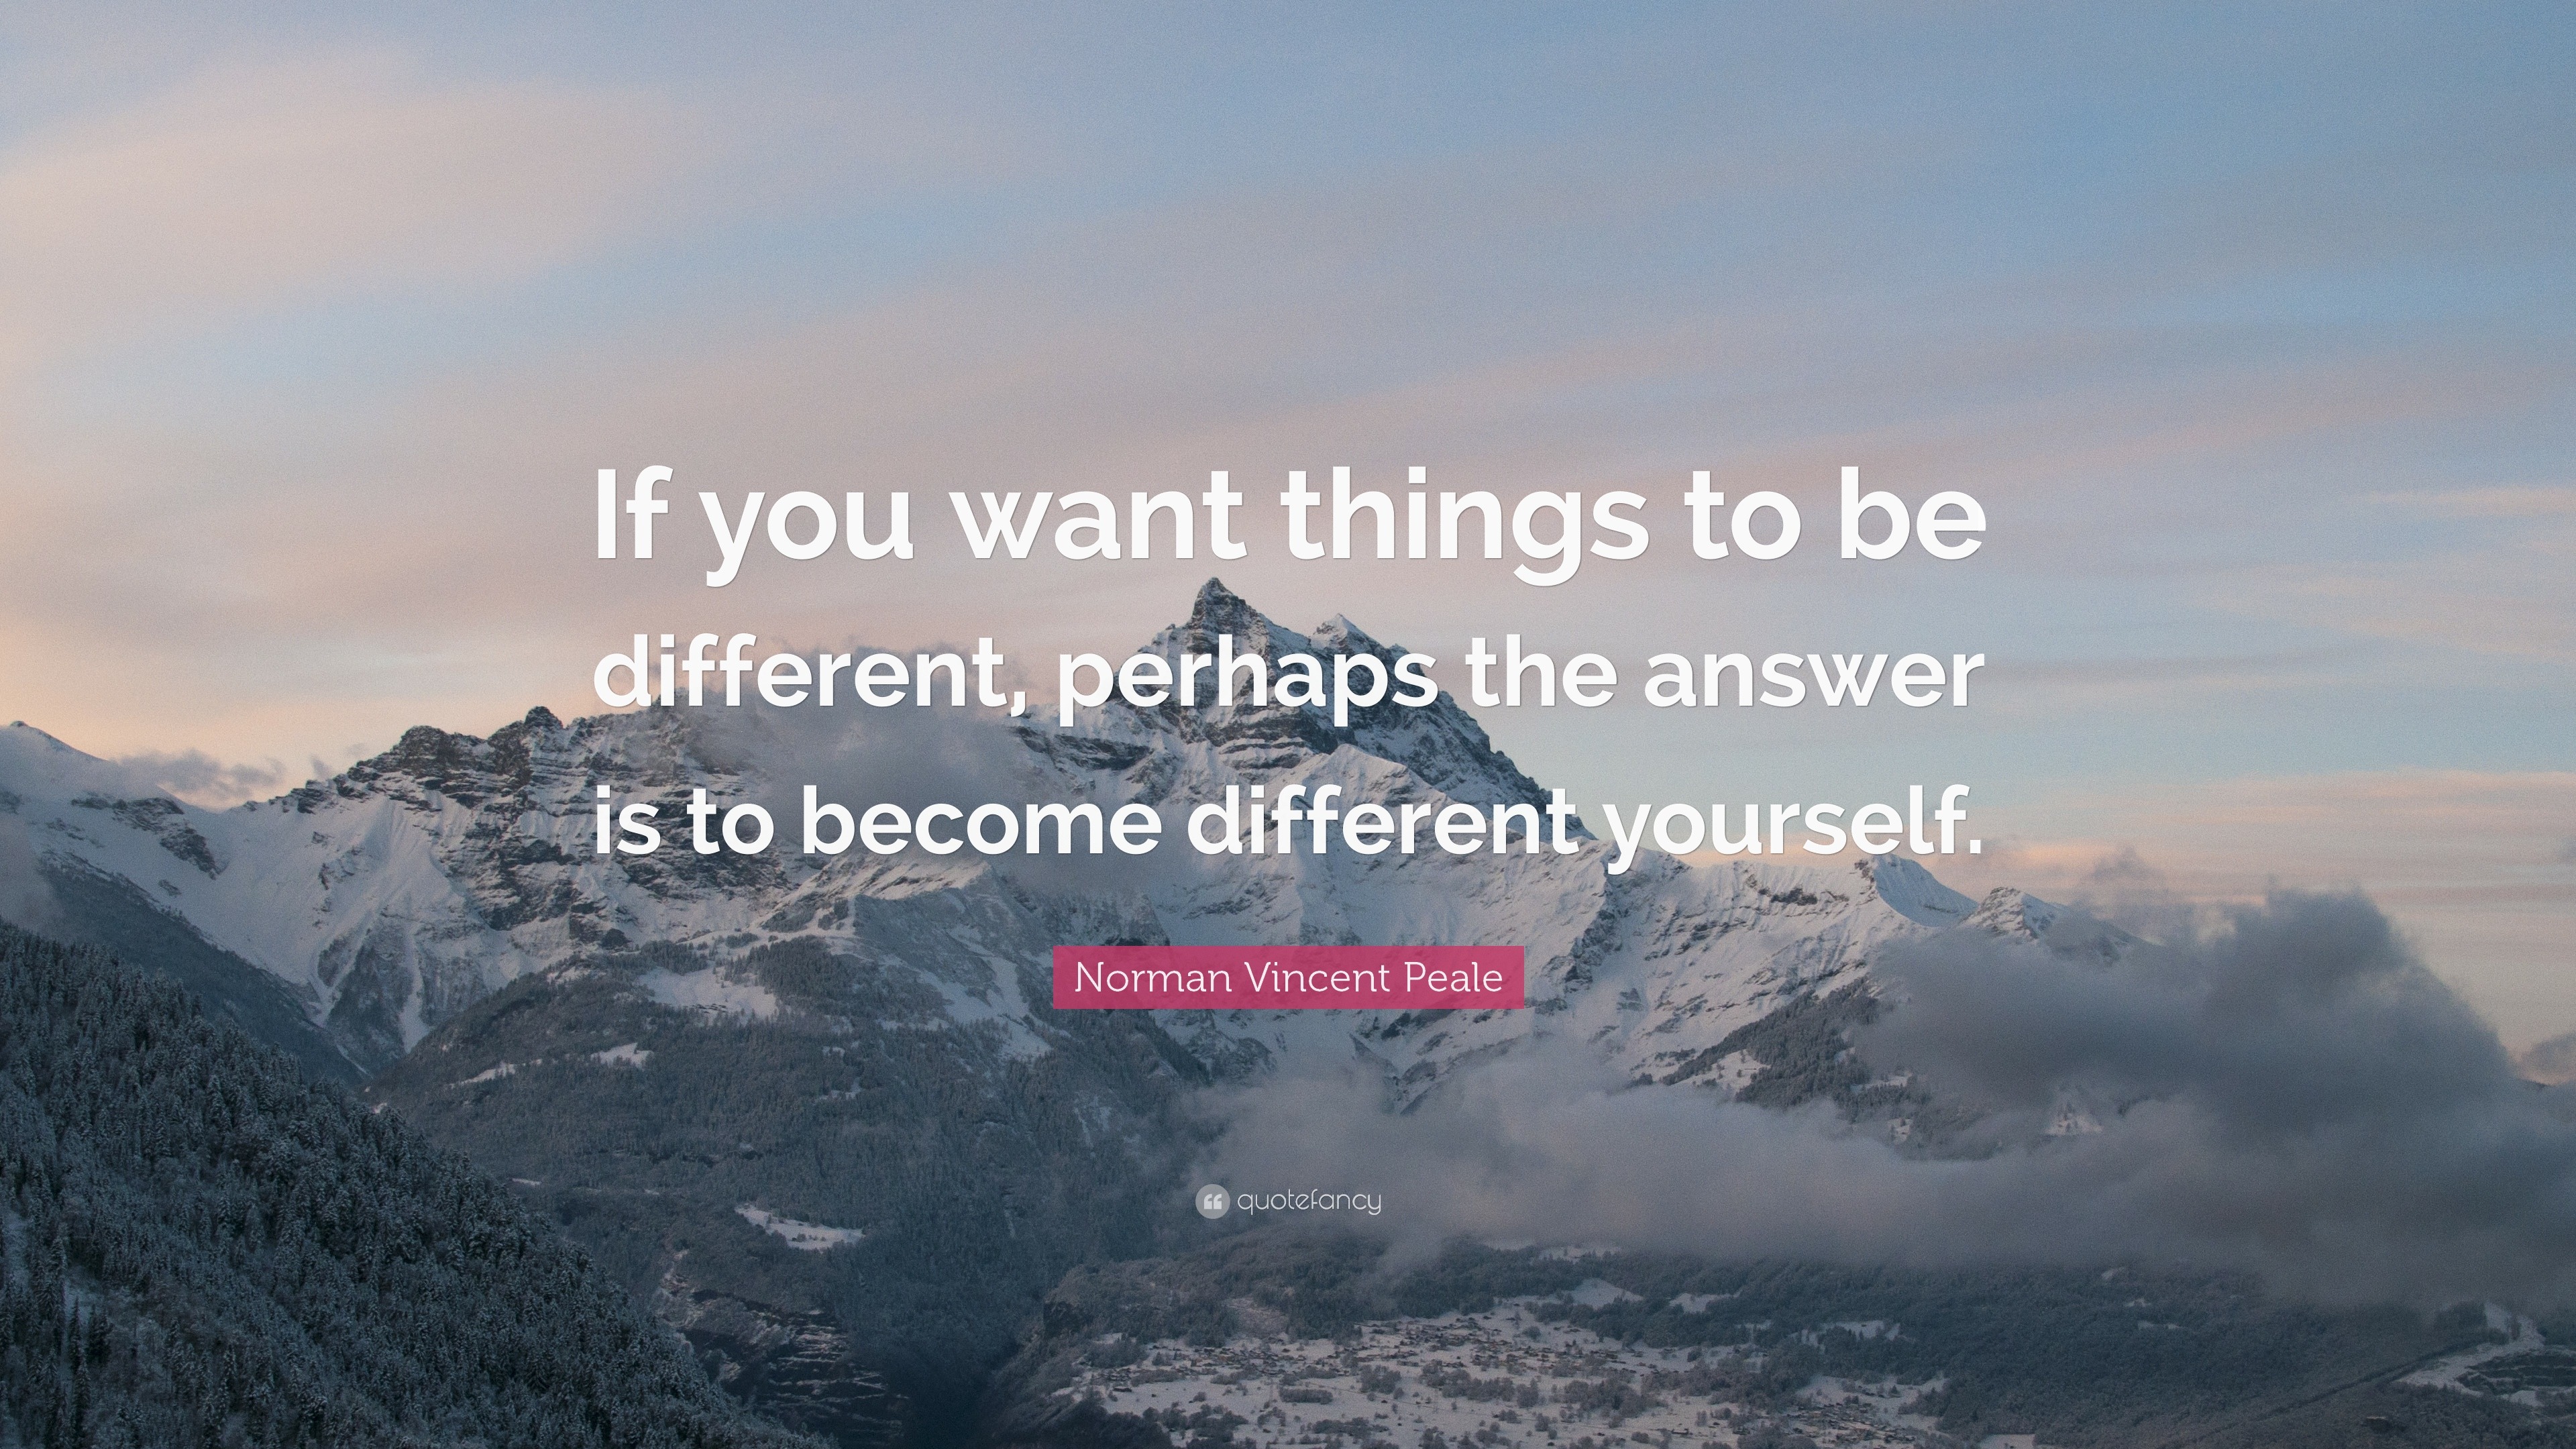 Norman Vincent Peale Quote: “If you want things to be different ...